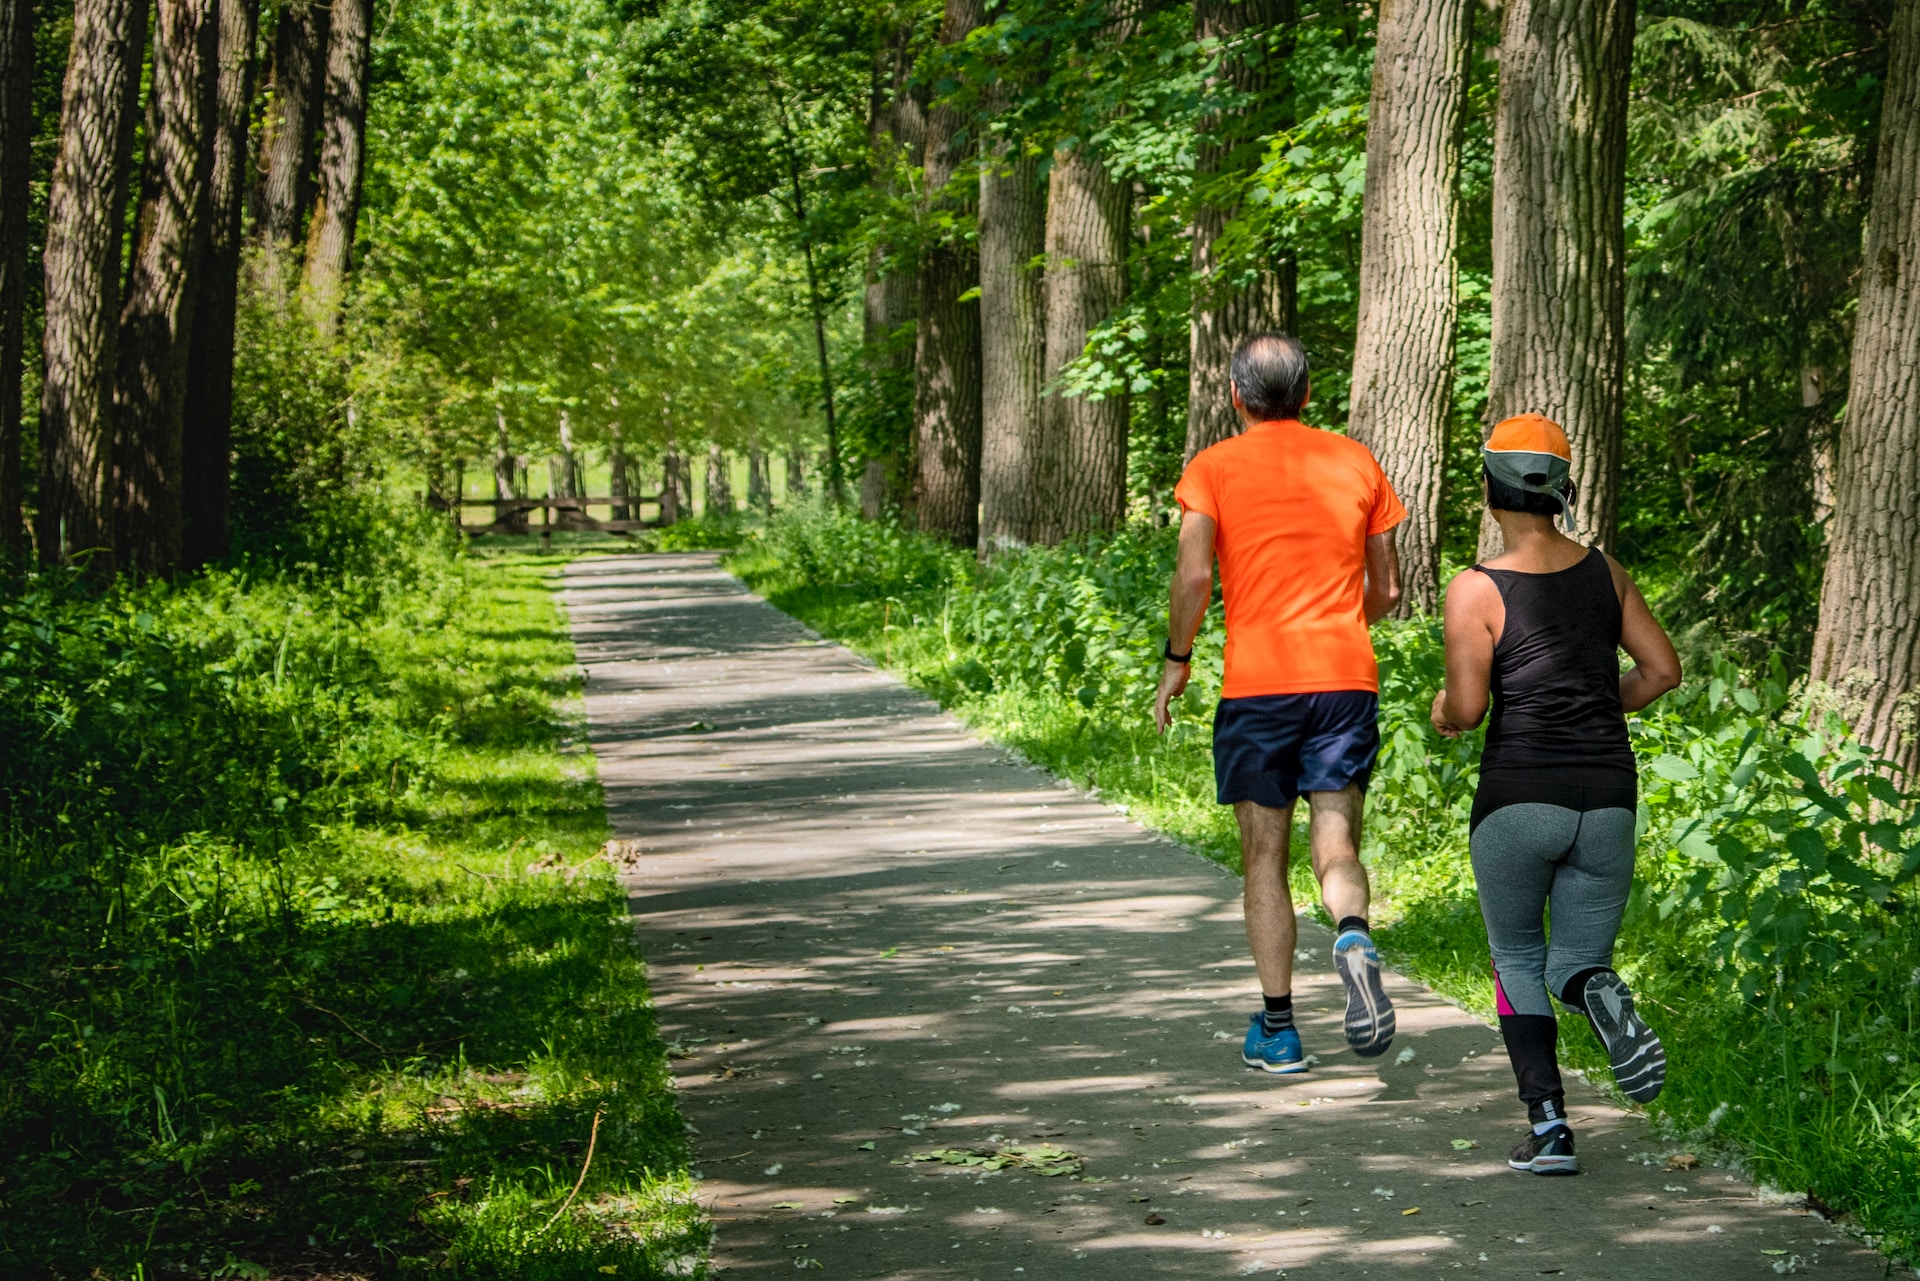 A man and a woman running along a concrete path in a lush green park with trees either side.